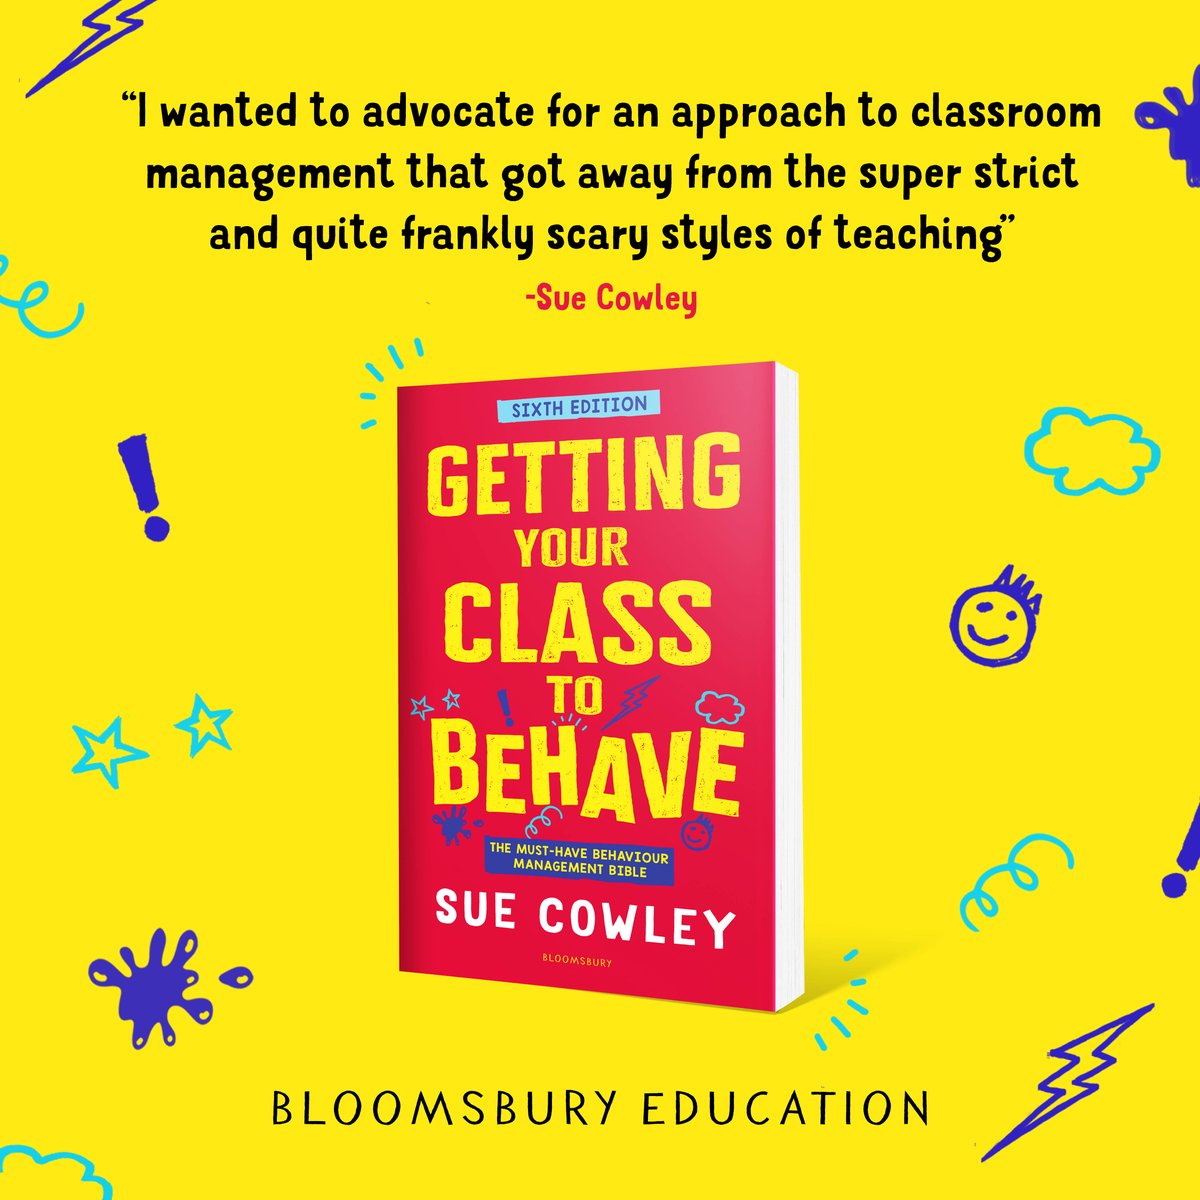 We joined @Sue_Cowley to chat about her book Getting Your Class to Behave and her teaching career! Read the Q&A here: bit.ly/3w3eZCe